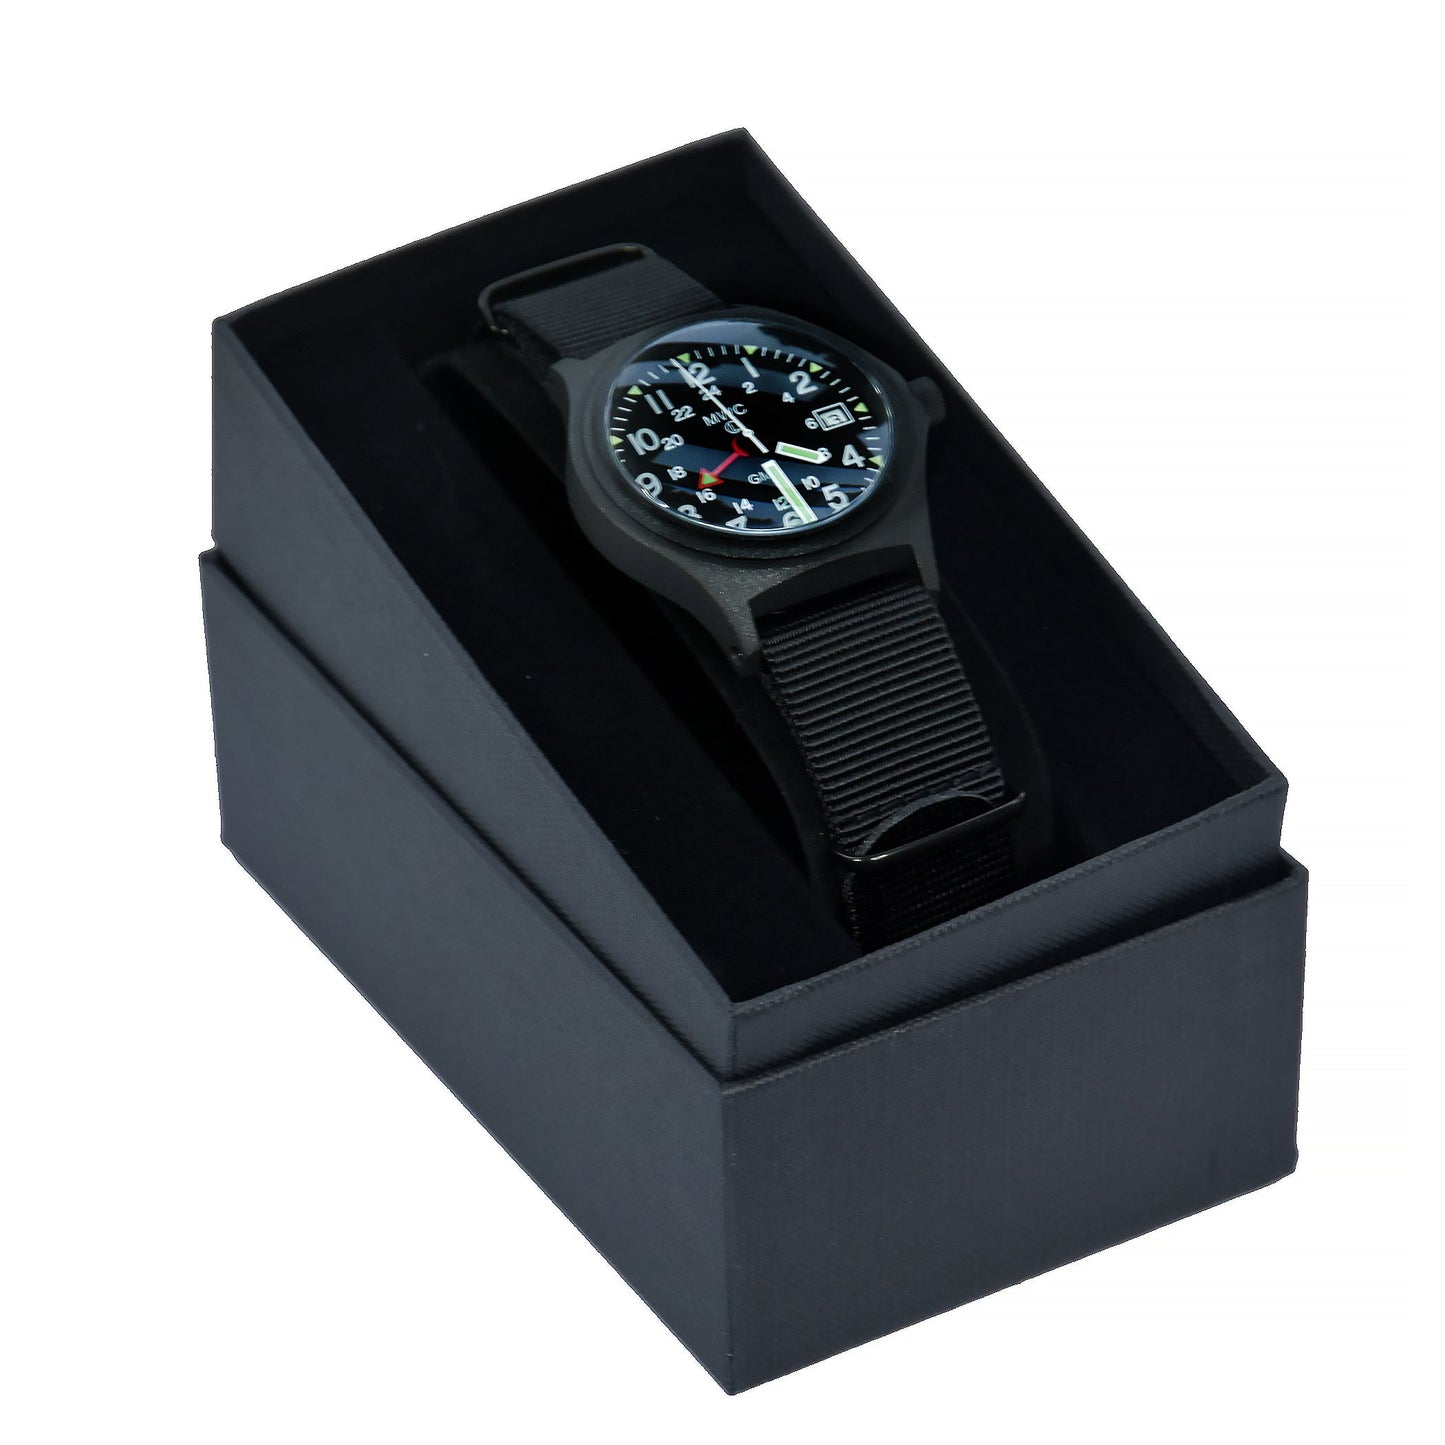 MWC GMT (Dual Time Zone) 100m Water resistant Military Watch in Black PVD Steel Case with Screw Crown